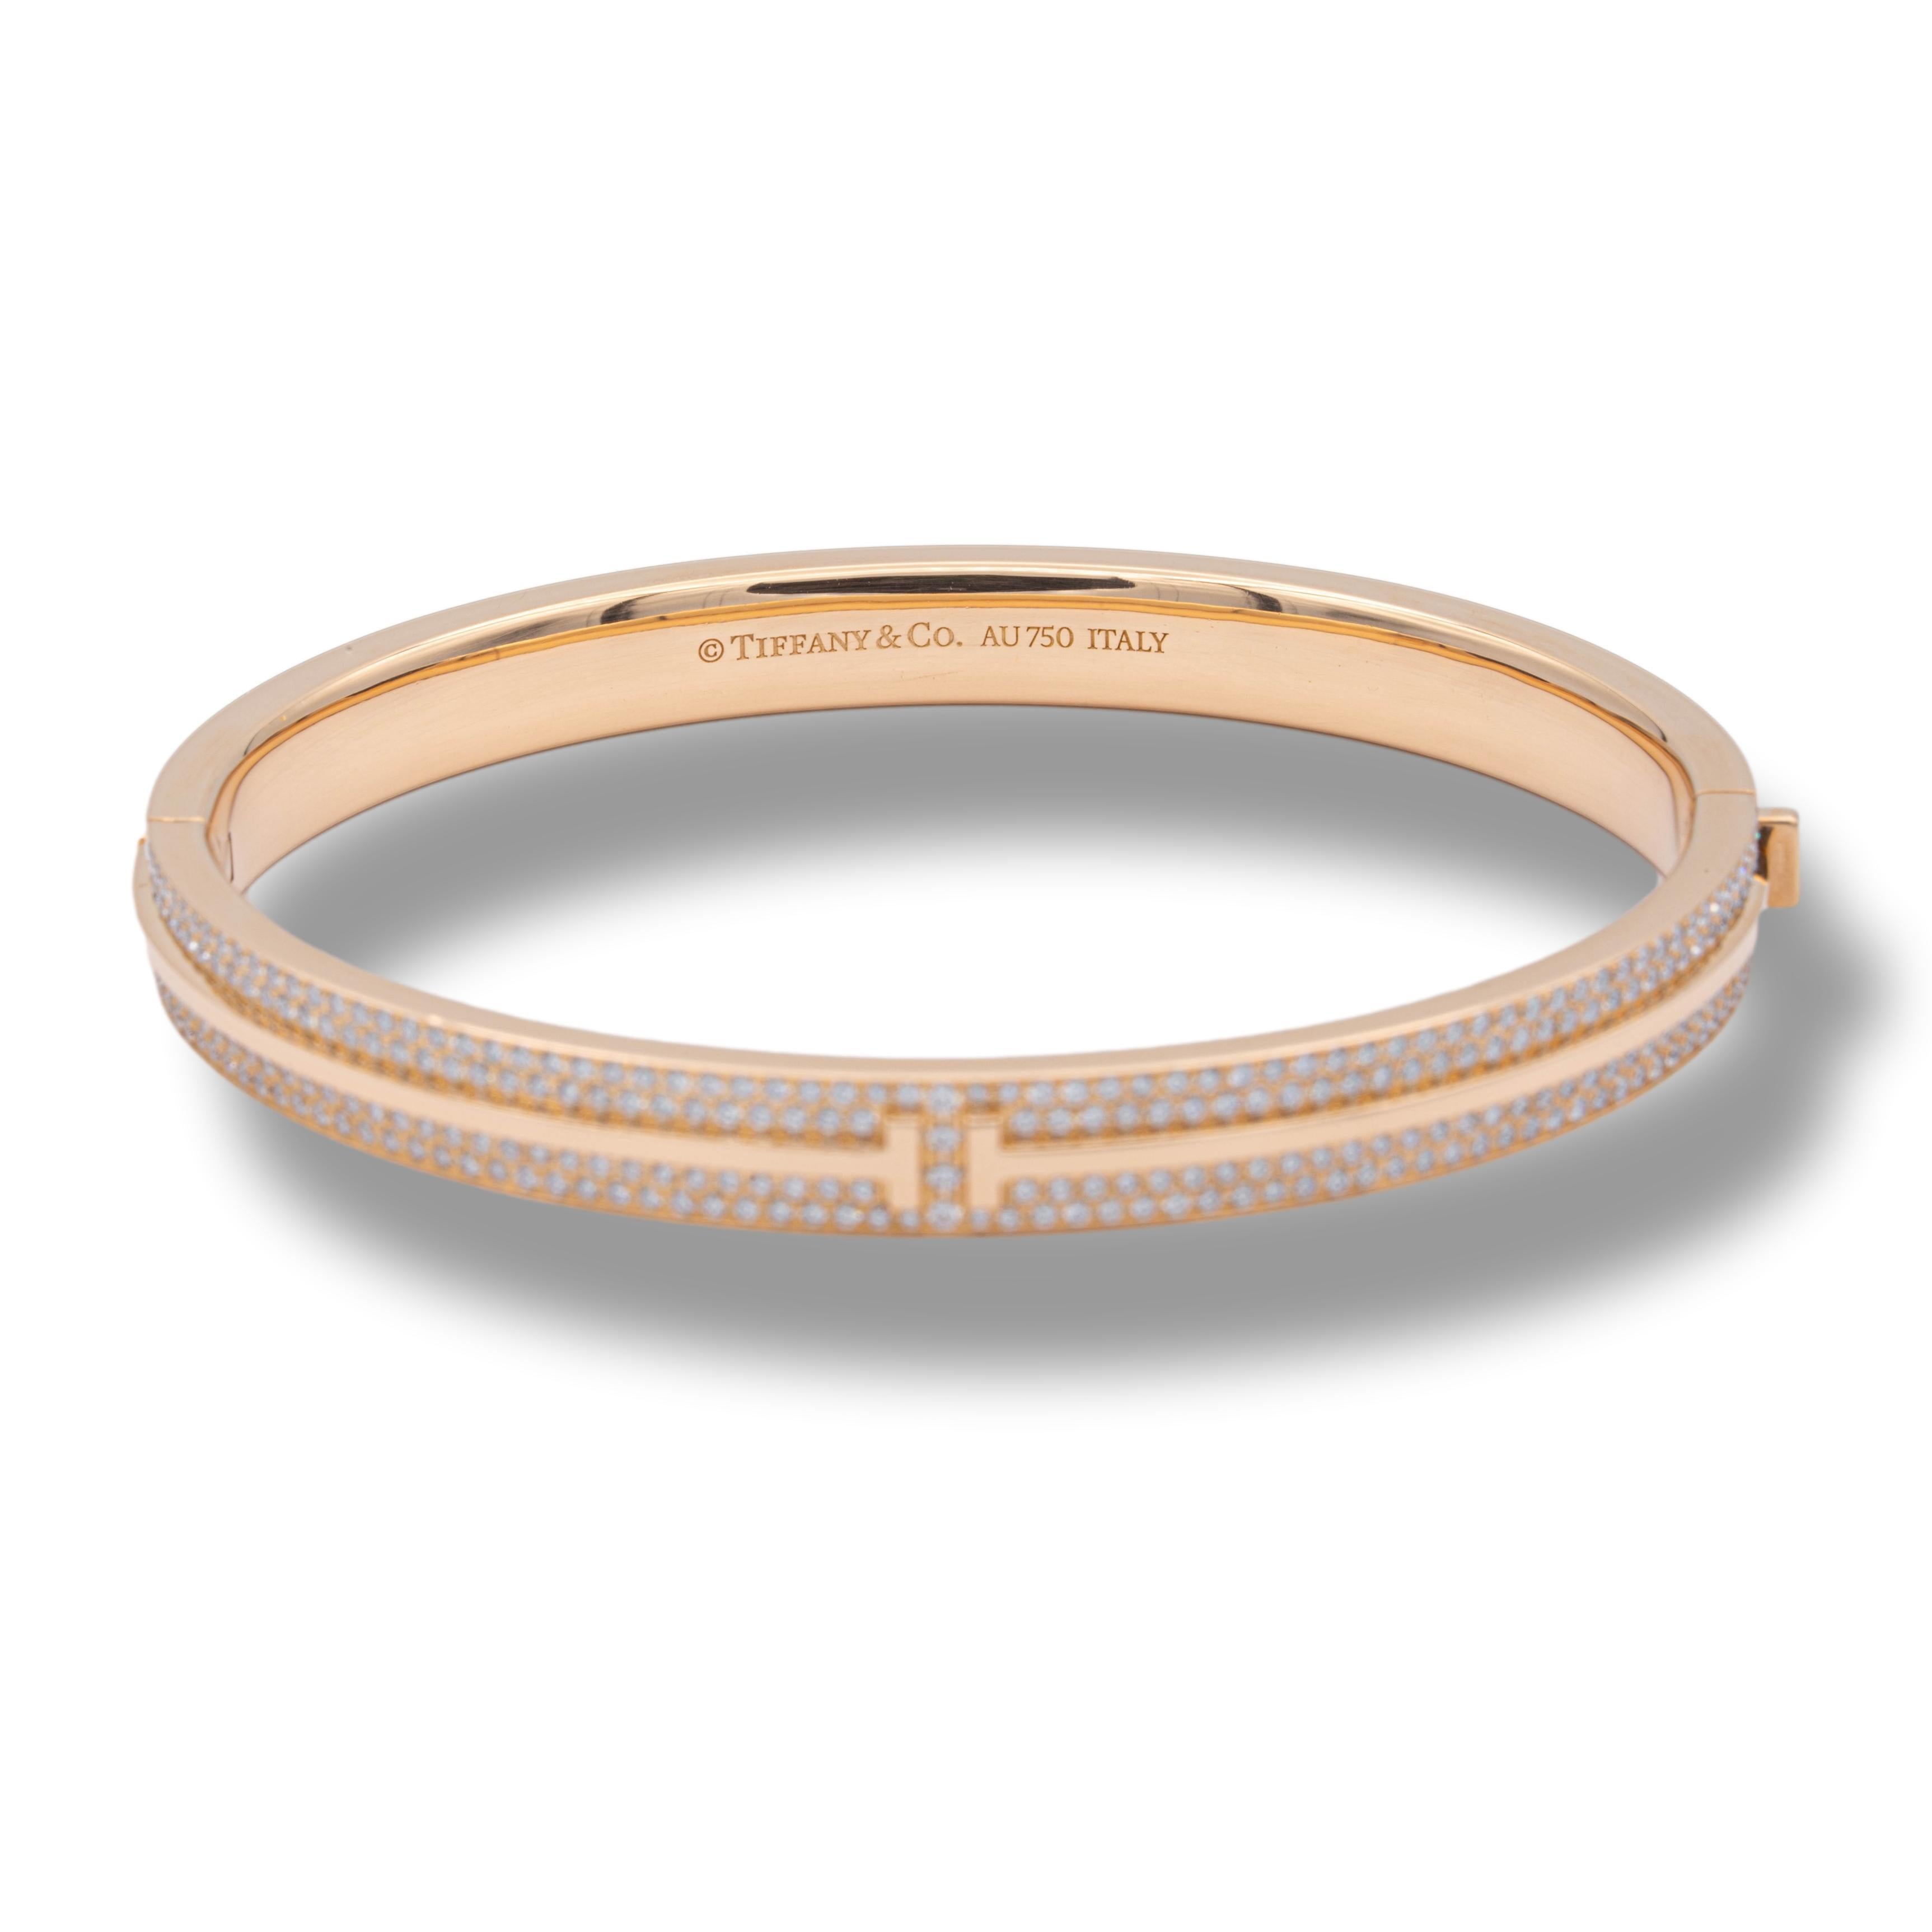 Tiffany & Co. T motif pave diamond bangle bracelet finely crafted in 18 karat rose gold with a double safety hinge closure.
The bracelet has pave set diamonds halfway across the top weighing a total of 0.82 cts. Medium size, which fits wrists up to